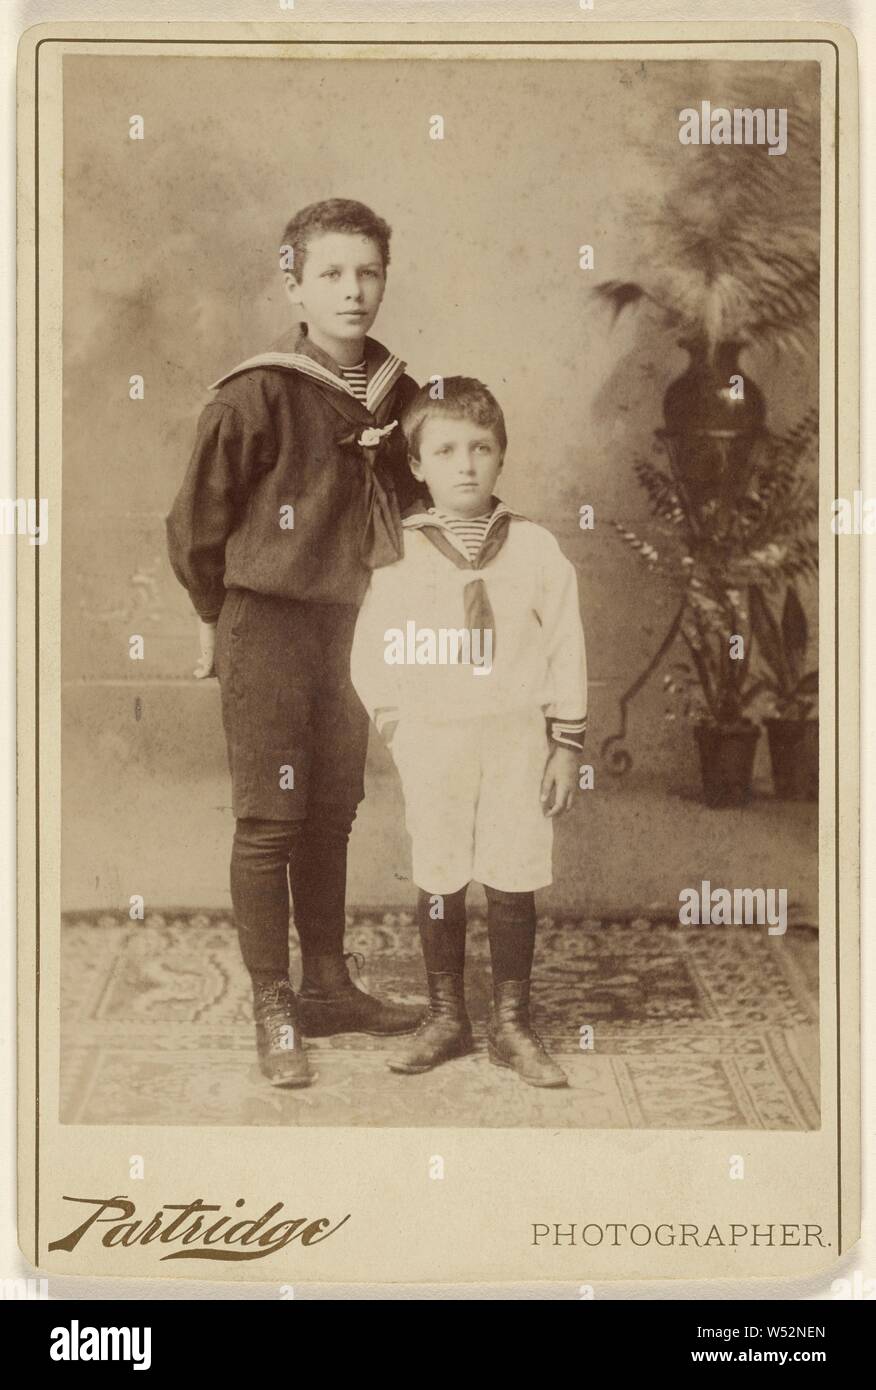 Two young boys standing, both wearing sailor-type outfits, Partridge (American, active Bridgeport, Connecticut 1870s - 1890s), 1890, Albumen silver print Stock Photo